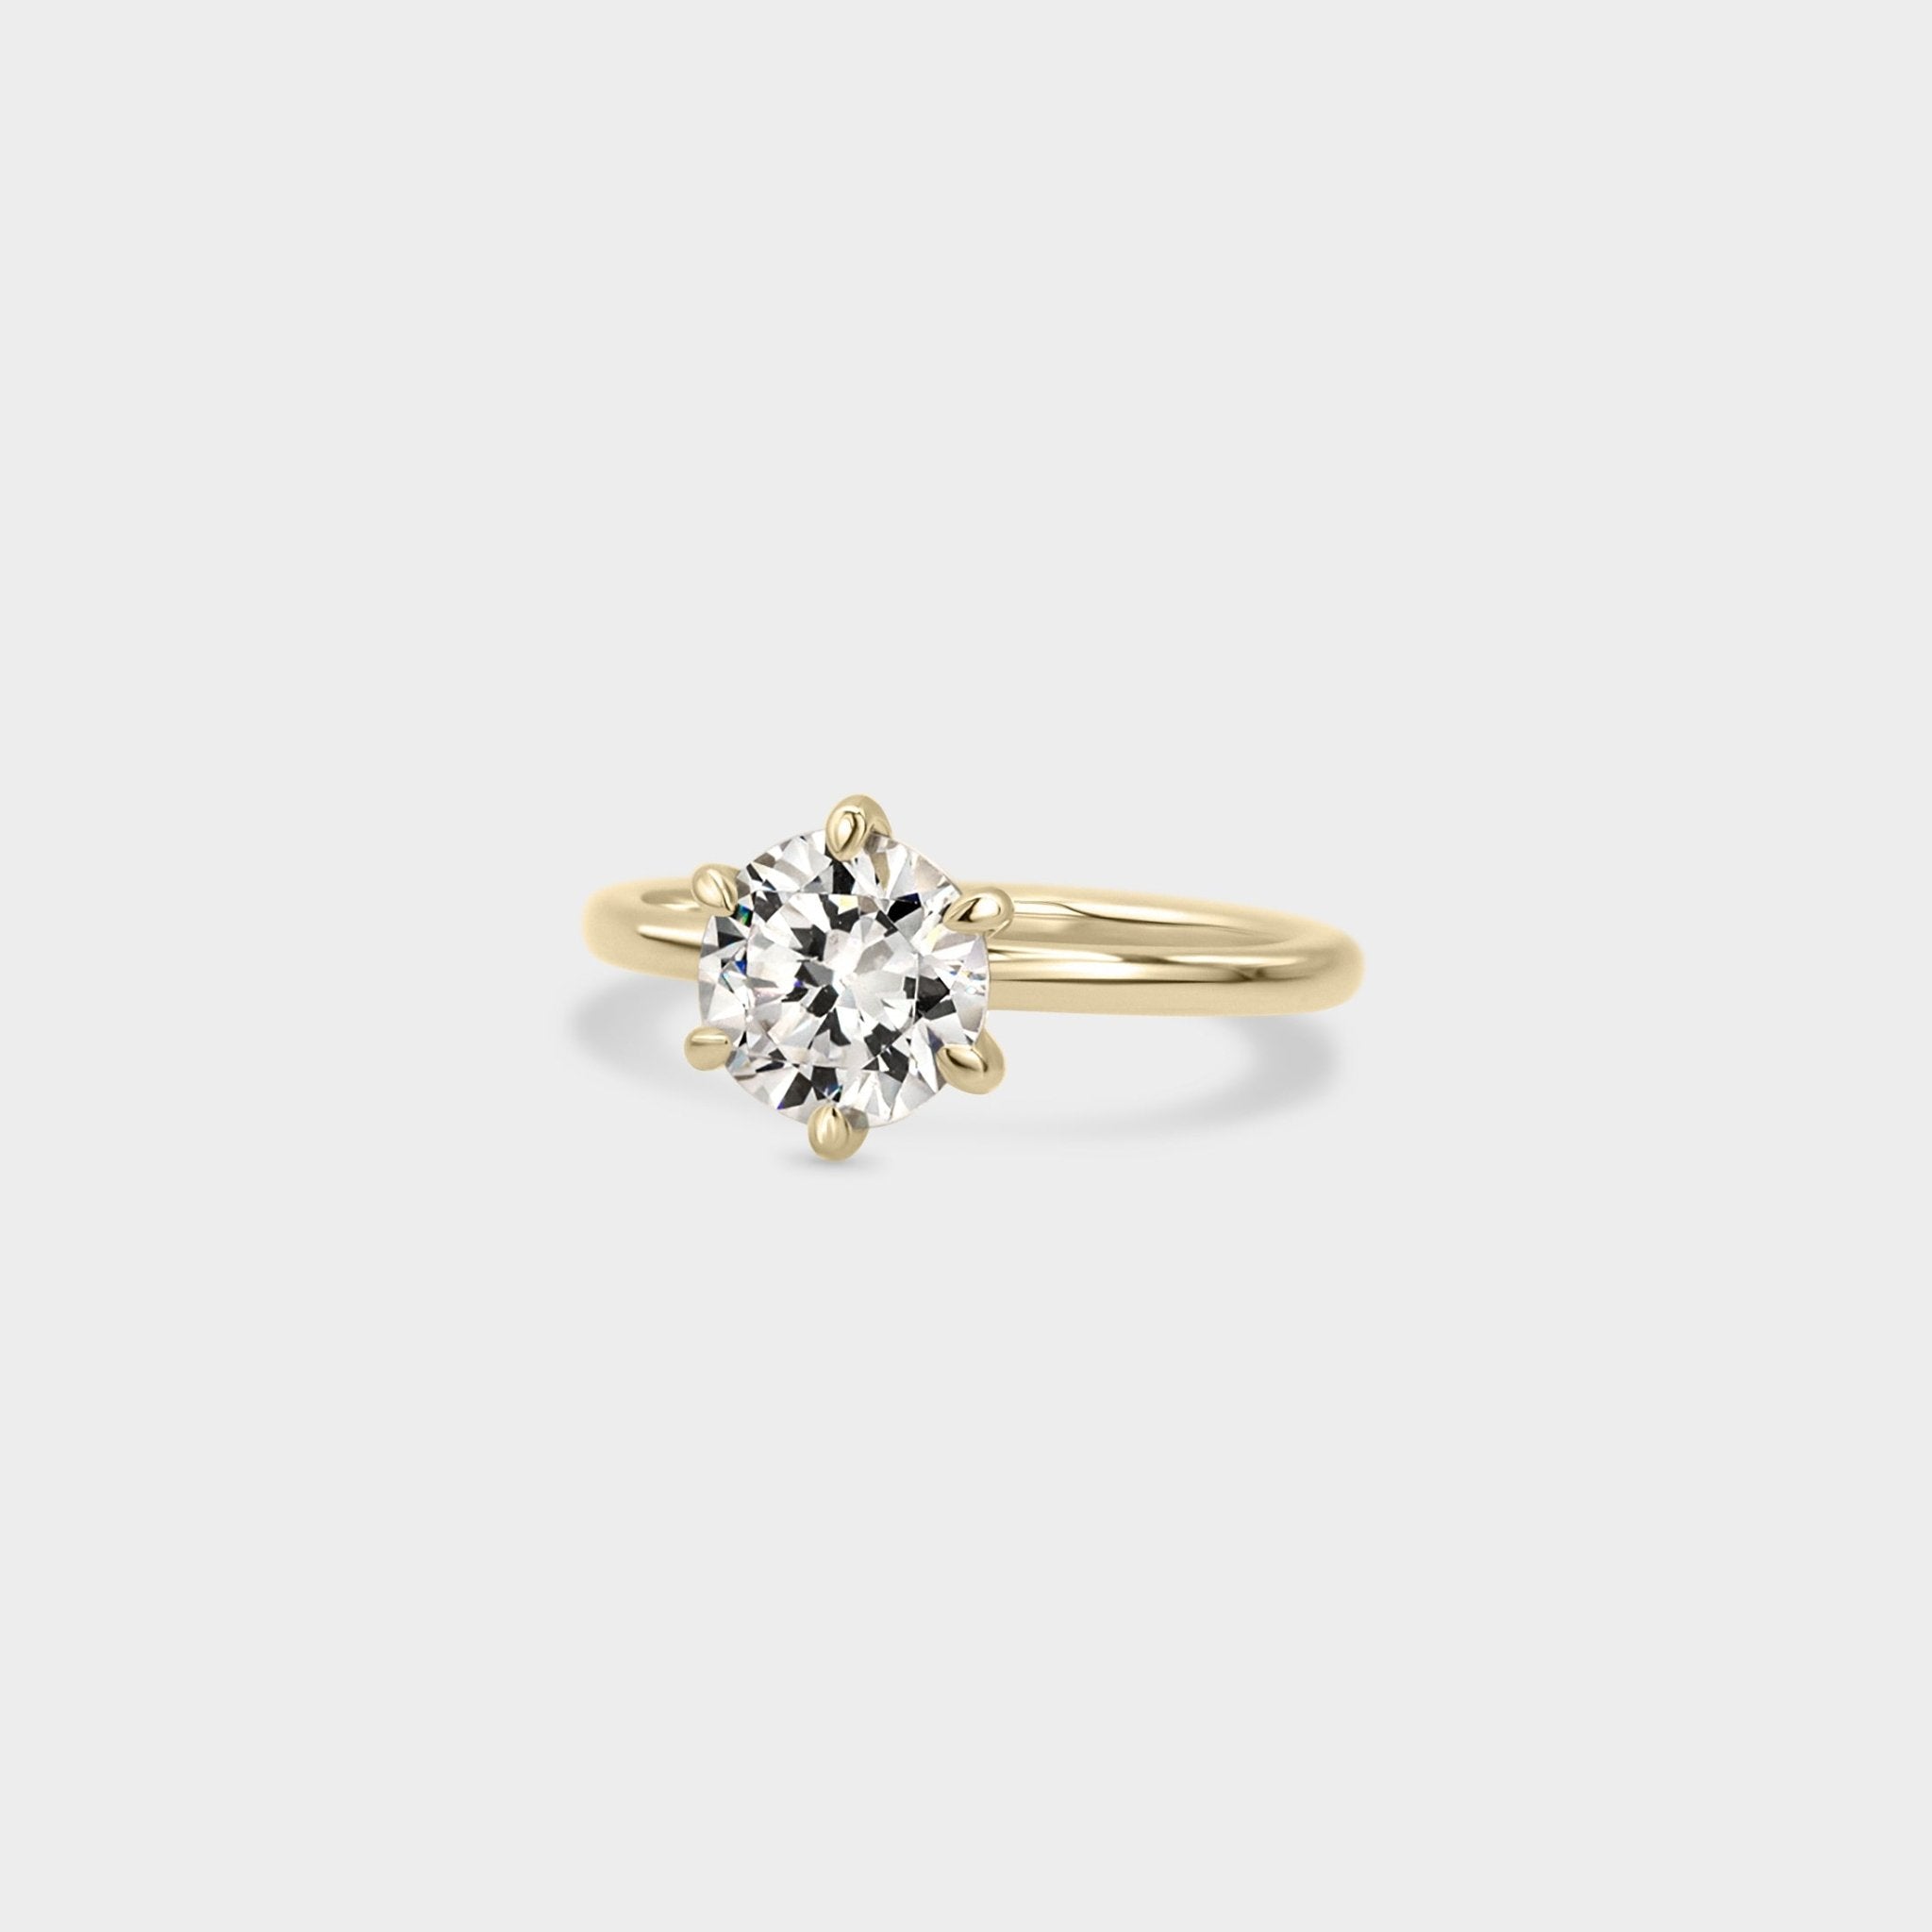 Solitaire of Round LAB GROWN Diamond - Laher -